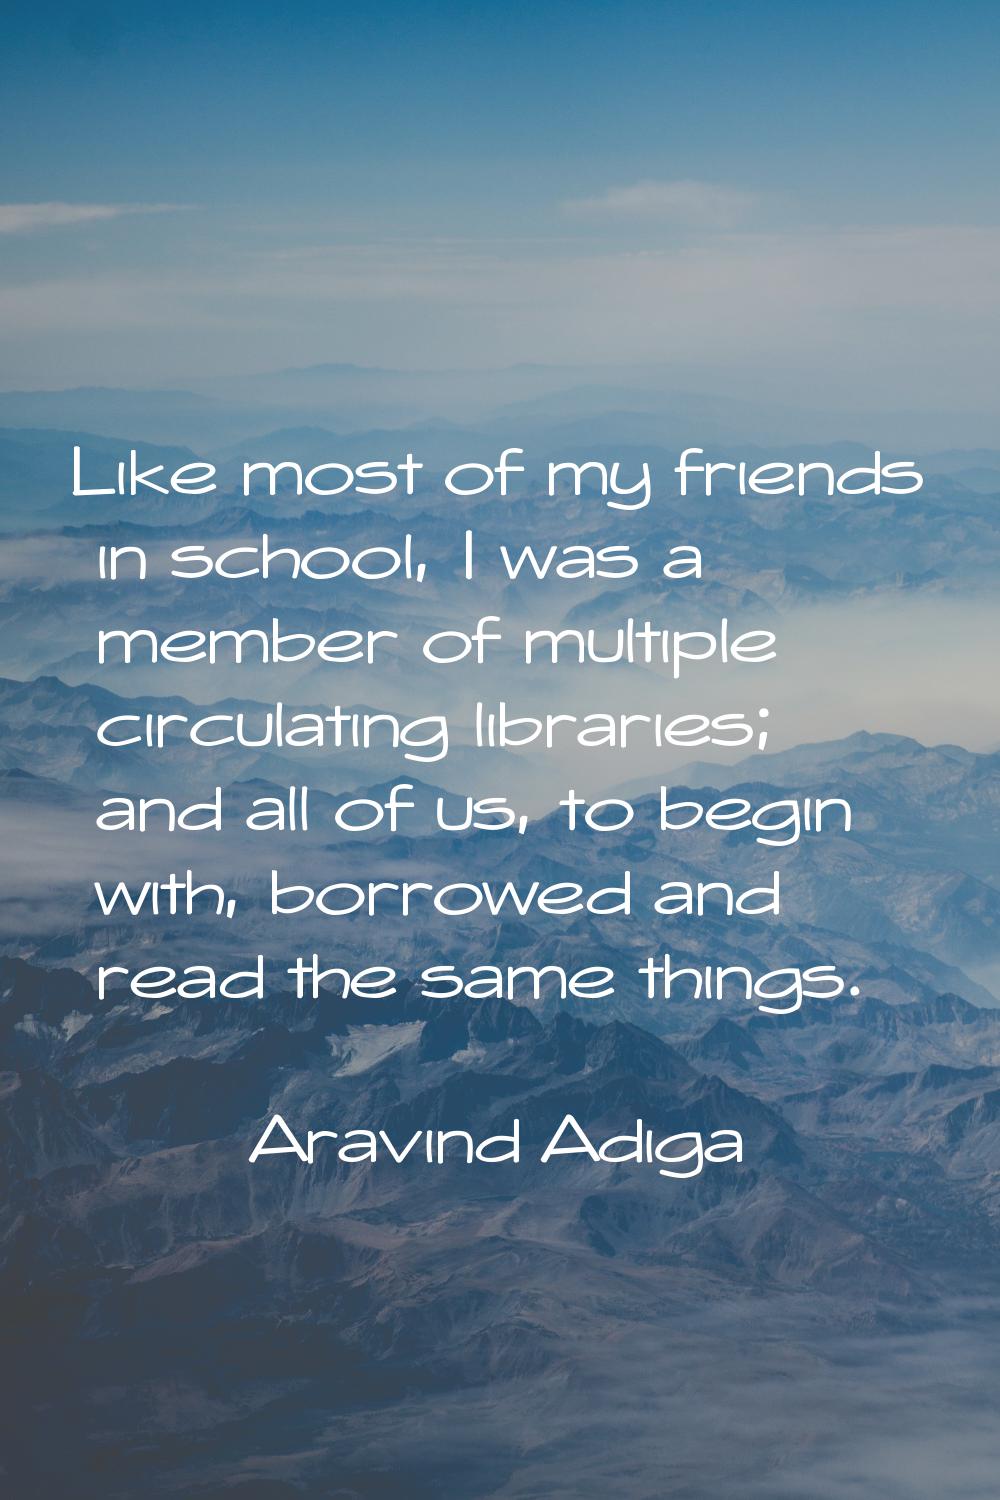 Like most of my friends in school, I was a member of multiple circulating libraries; and all of us,